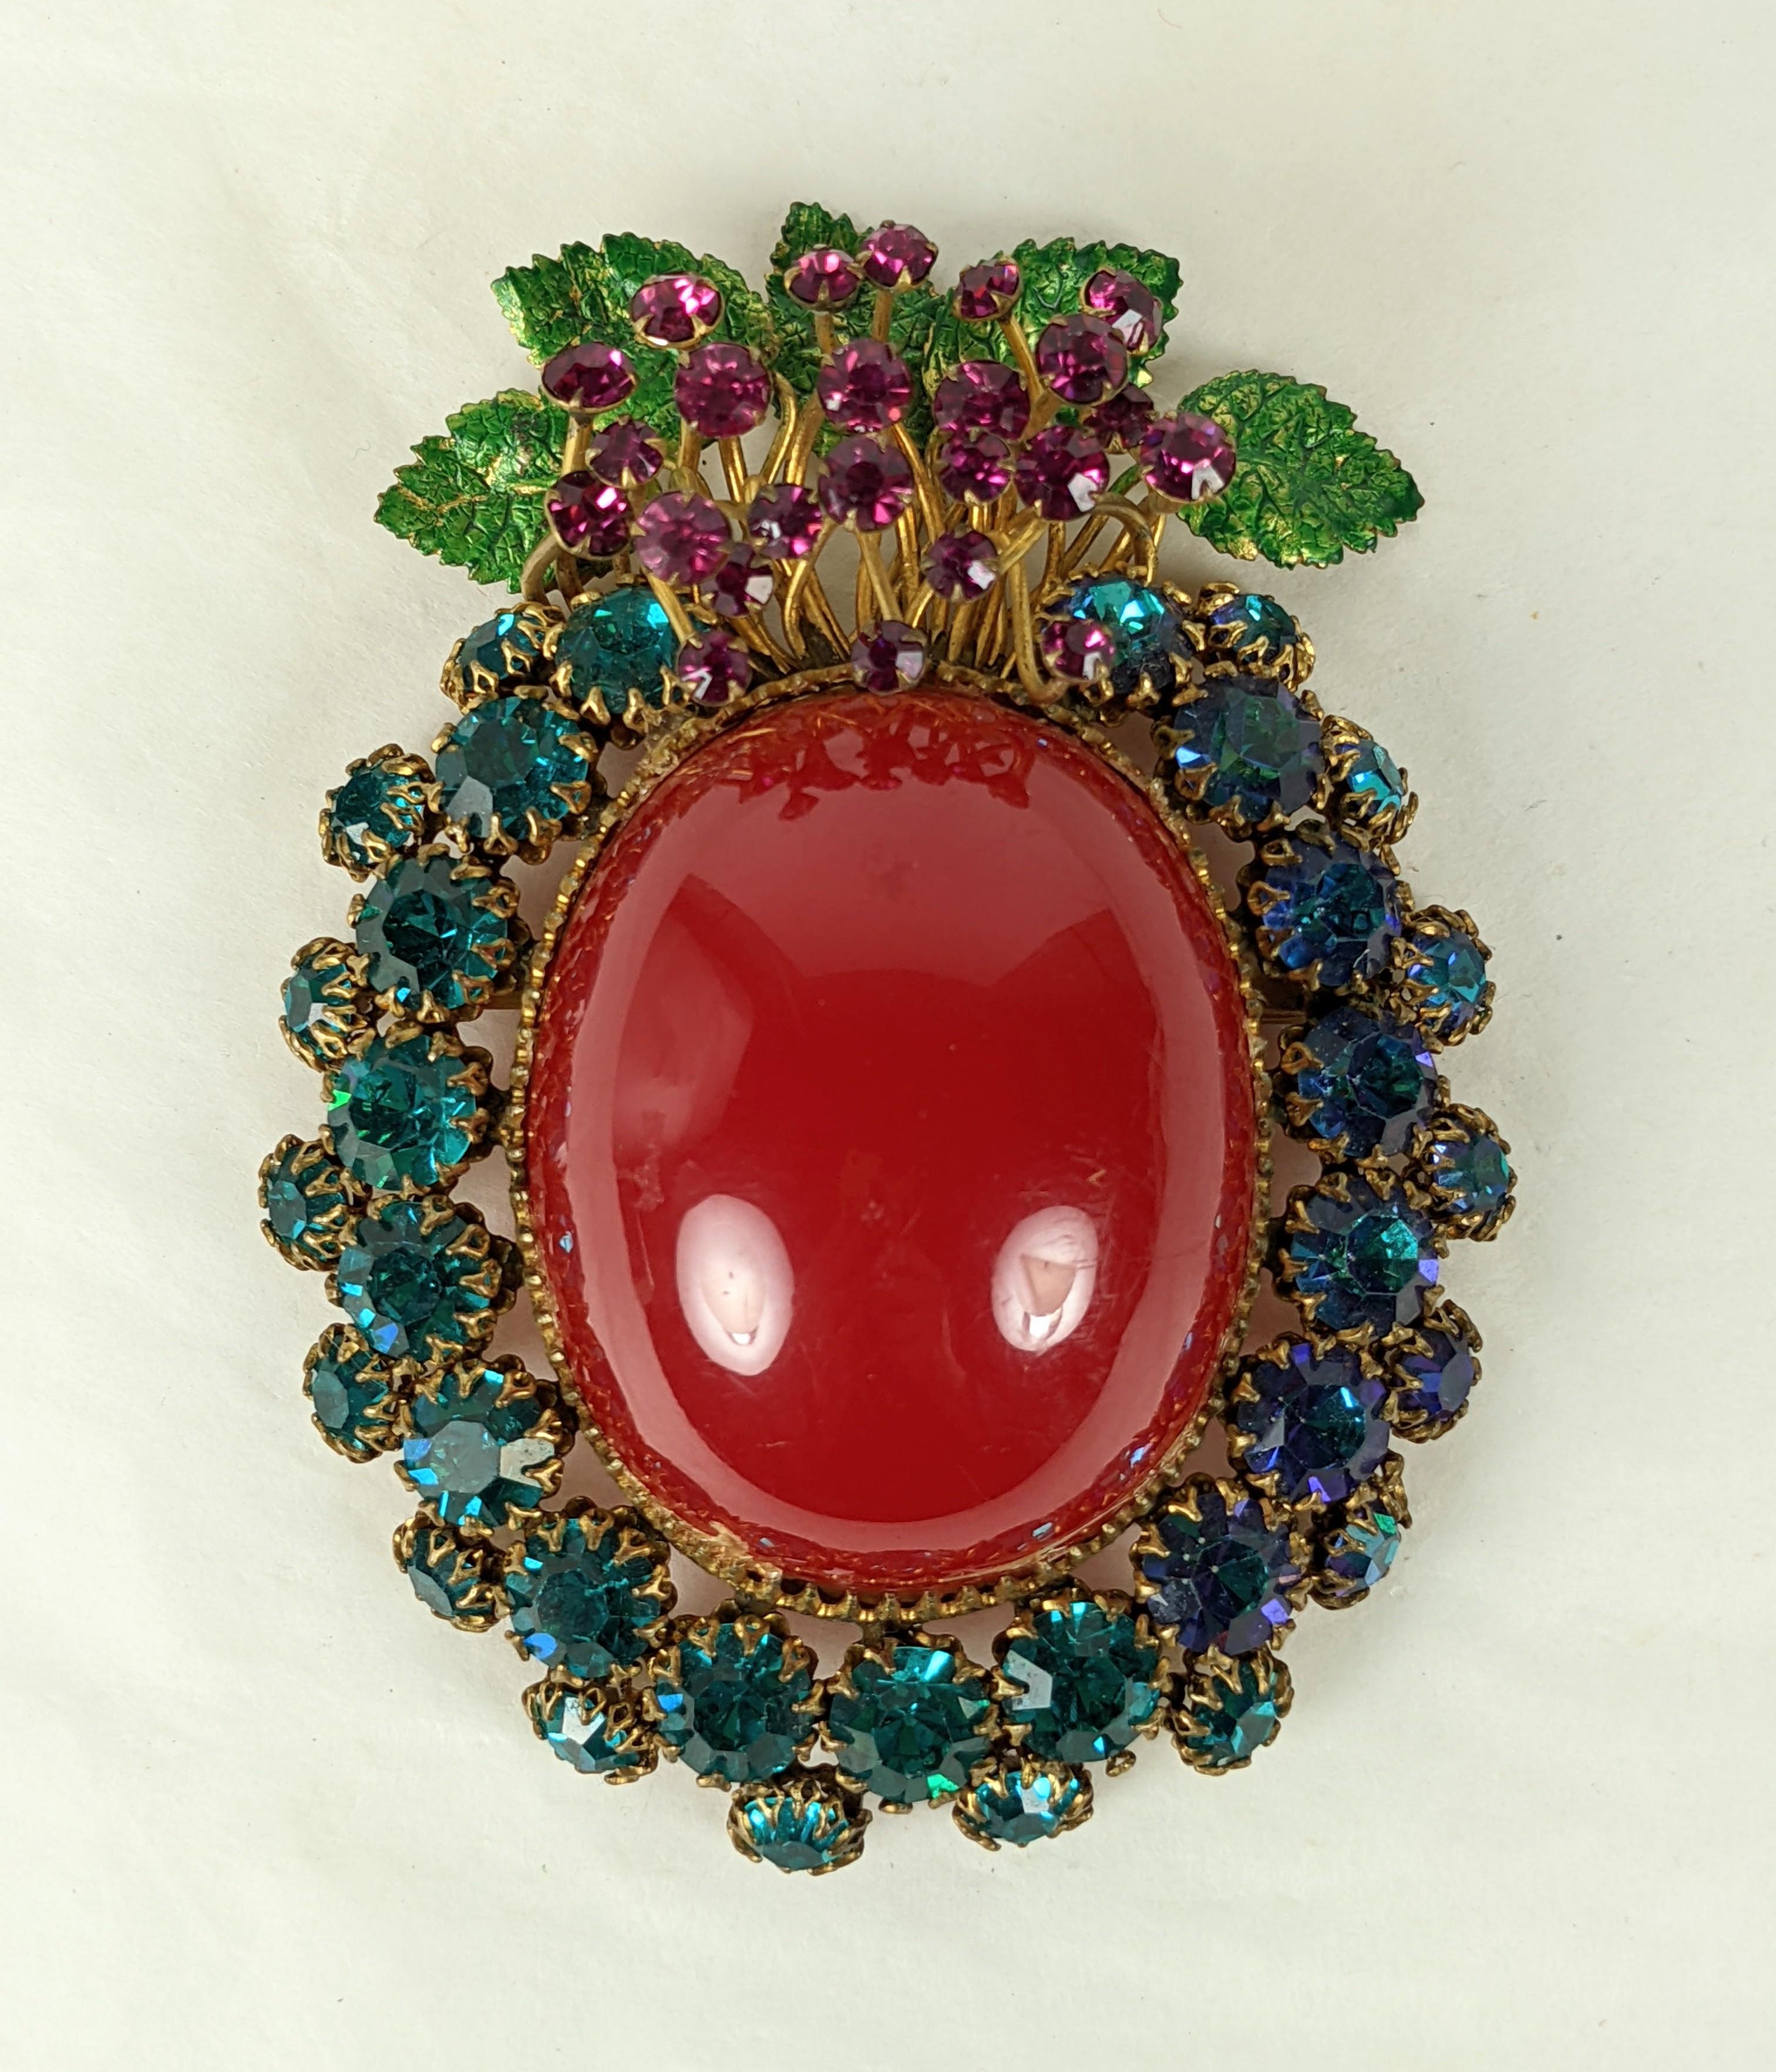 Incredible and rare Massive Countess Cis Floral Brooch from the 1950's France. Enormous rasberry bakelite cabochon is decorated with prong set Swarovski crystals in tones of deep turquoise with a spray of Fuschia crystals emanated from enameled